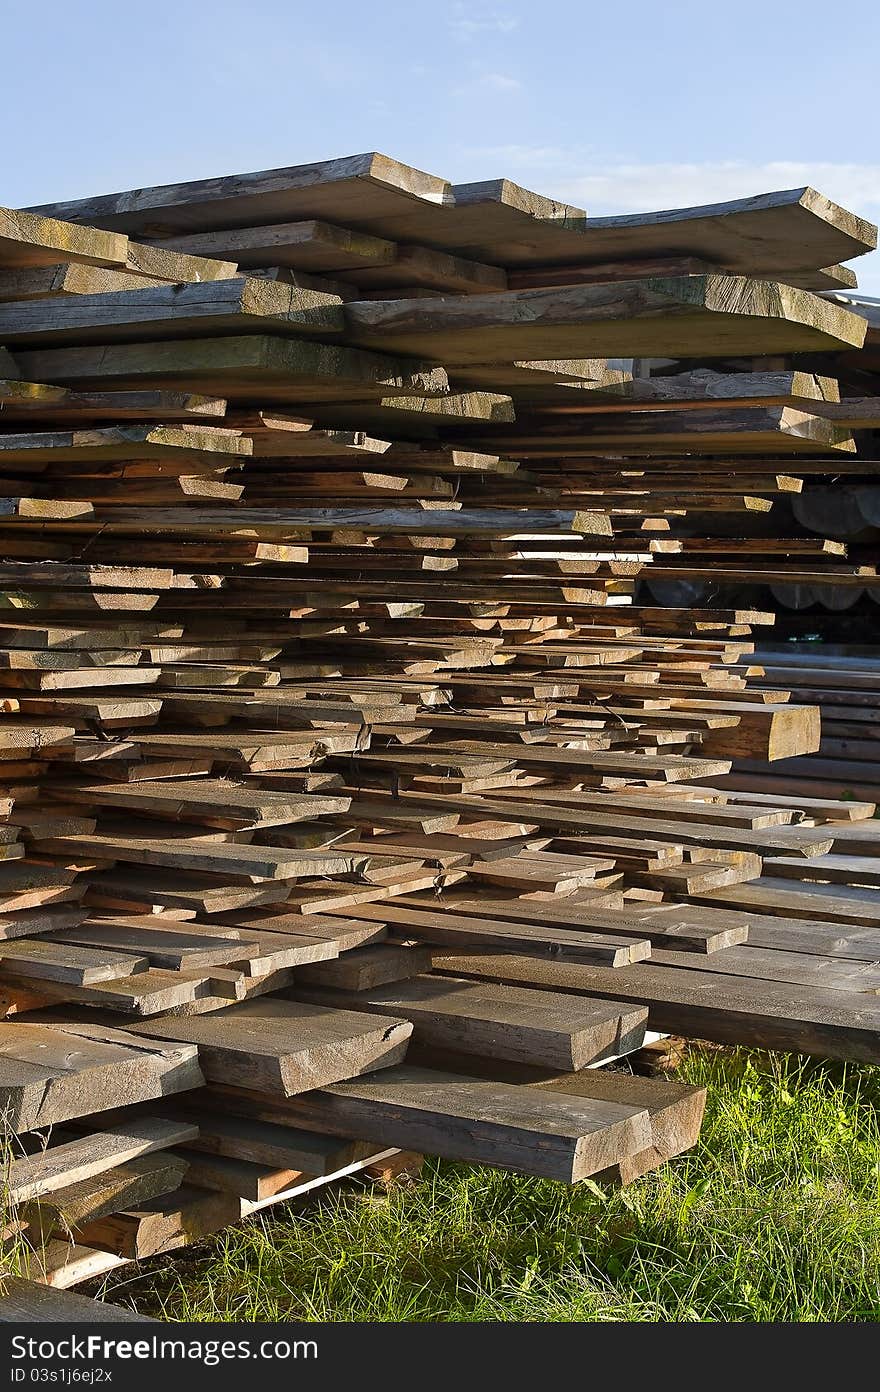 Composed of wooden planks from trees in the mountains